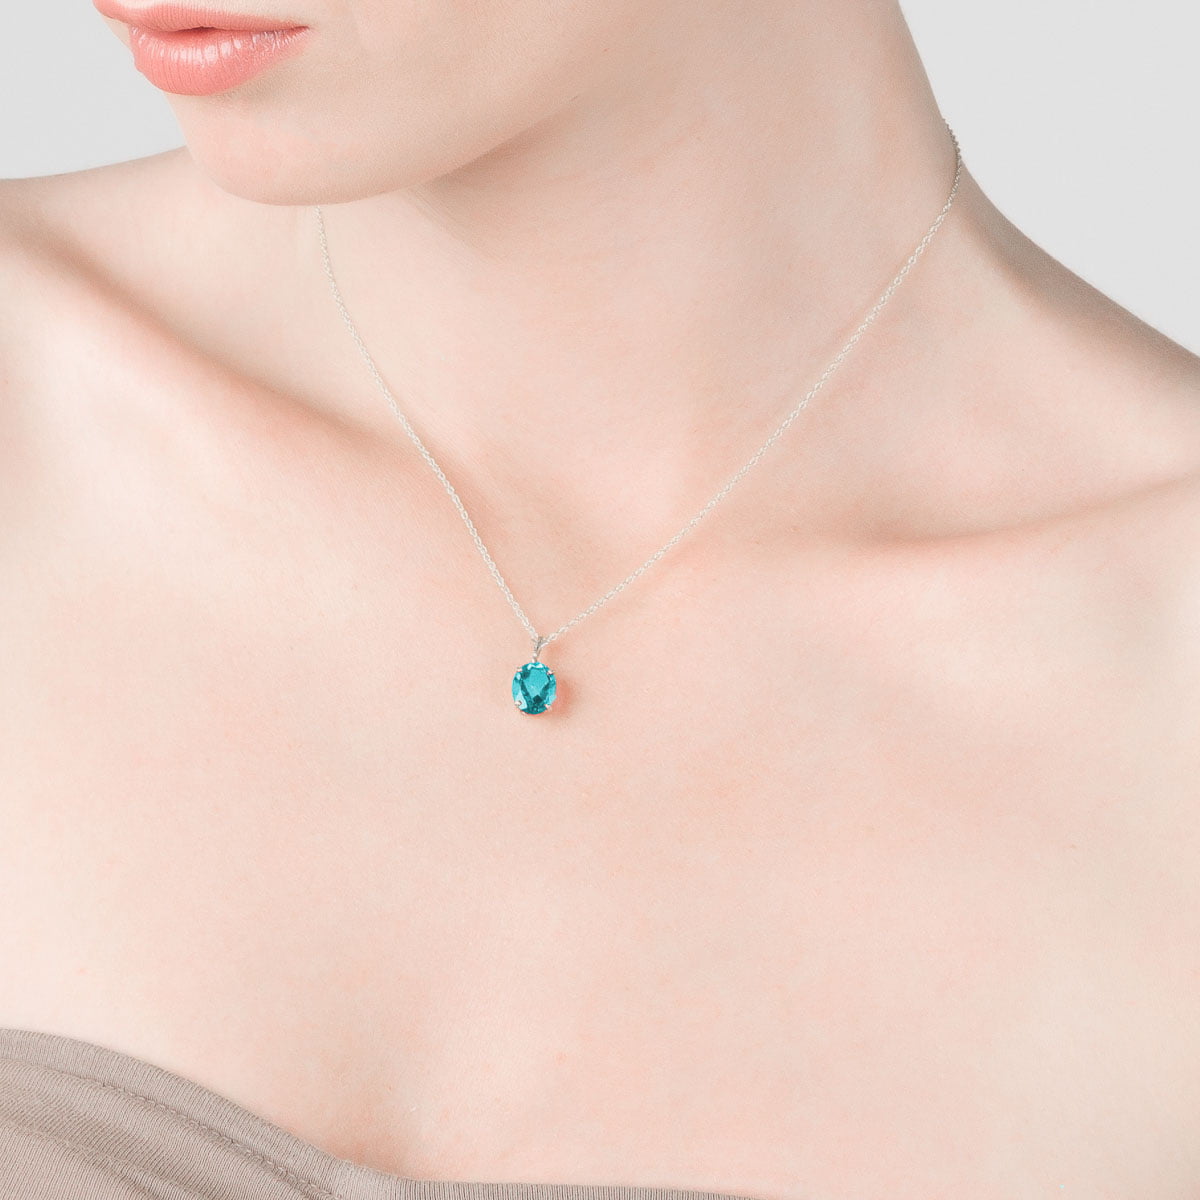 14K Solid Gold Necklace with Natural Blue Topaz